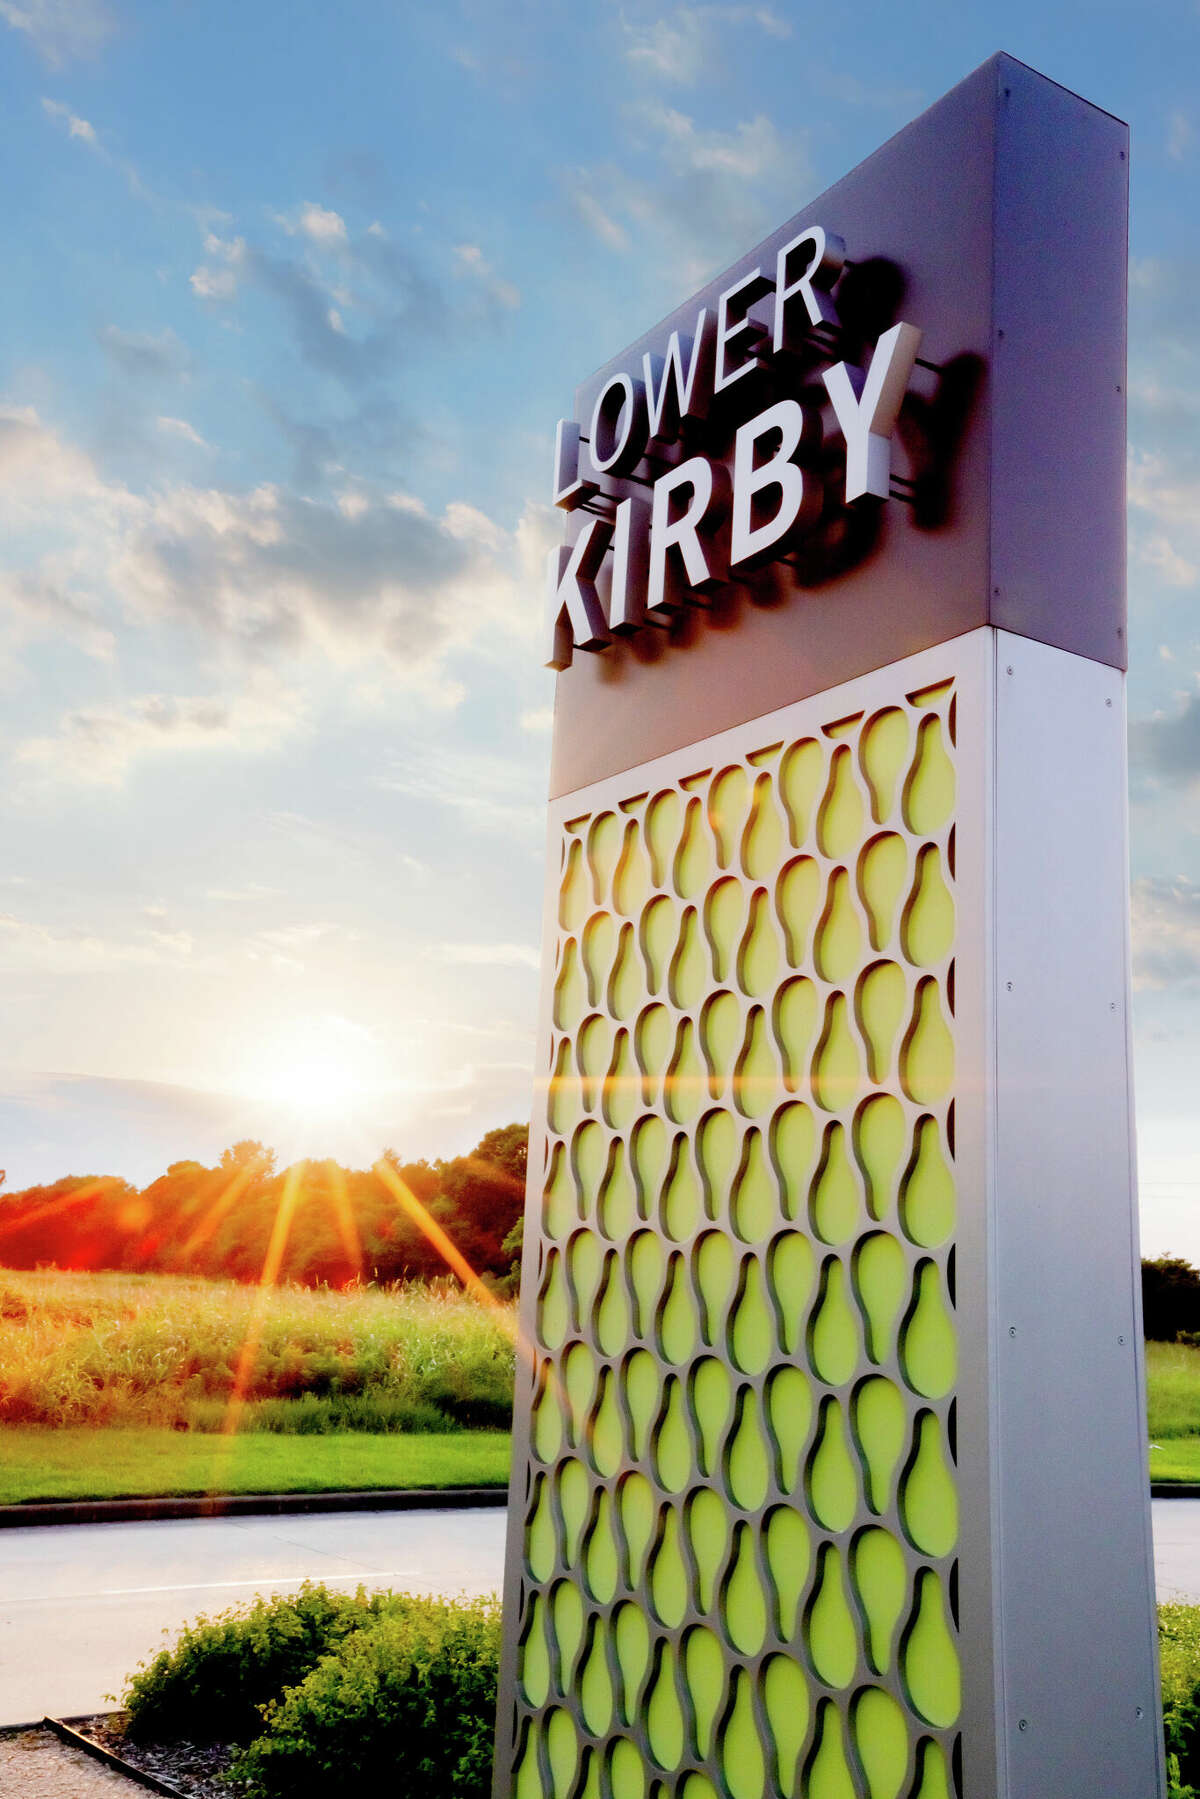 Lower Kirby in Pearland spans 1,200 acres at the southwest corner of the intersection of Beltway 8 and Texas 288.